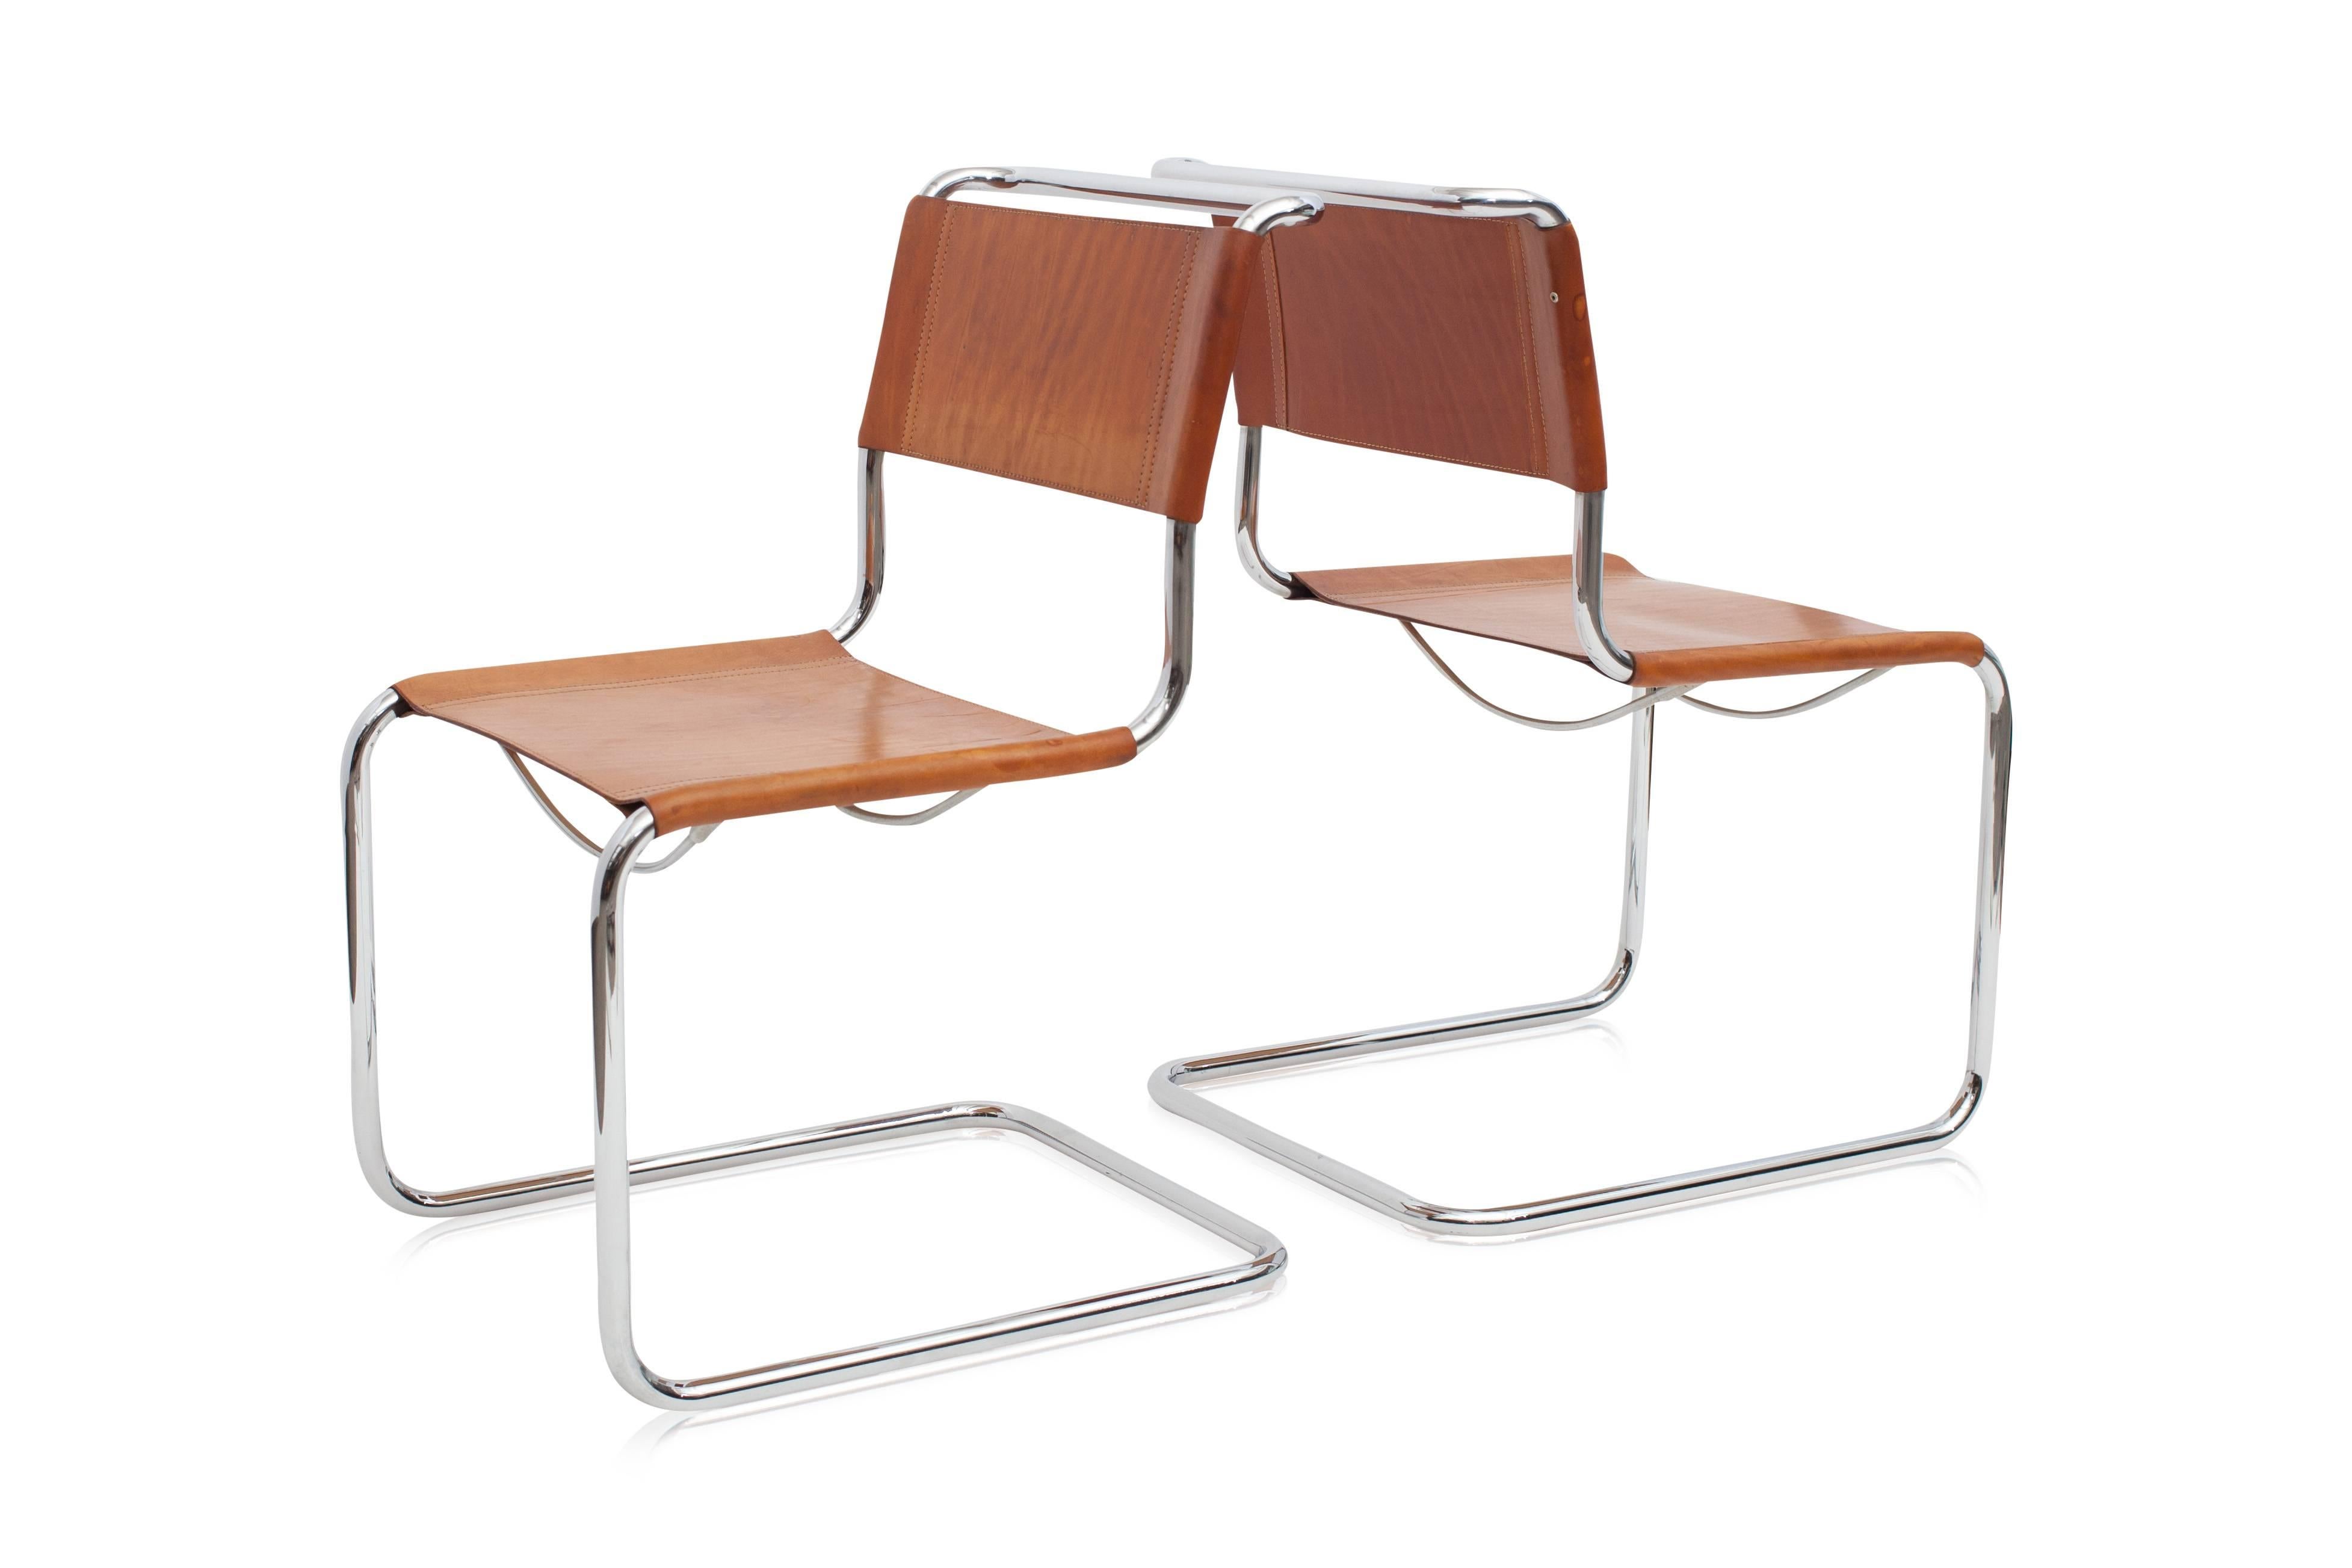 Tubular chromed steel cantilever dining chairs with cognac leather seating
in the manner of Marcel Breuer
nice patina on the leather only acquired by age

Italy, 1970s

Measures: W 53, D 59, H 86.5, SH 42.5 cm.

 